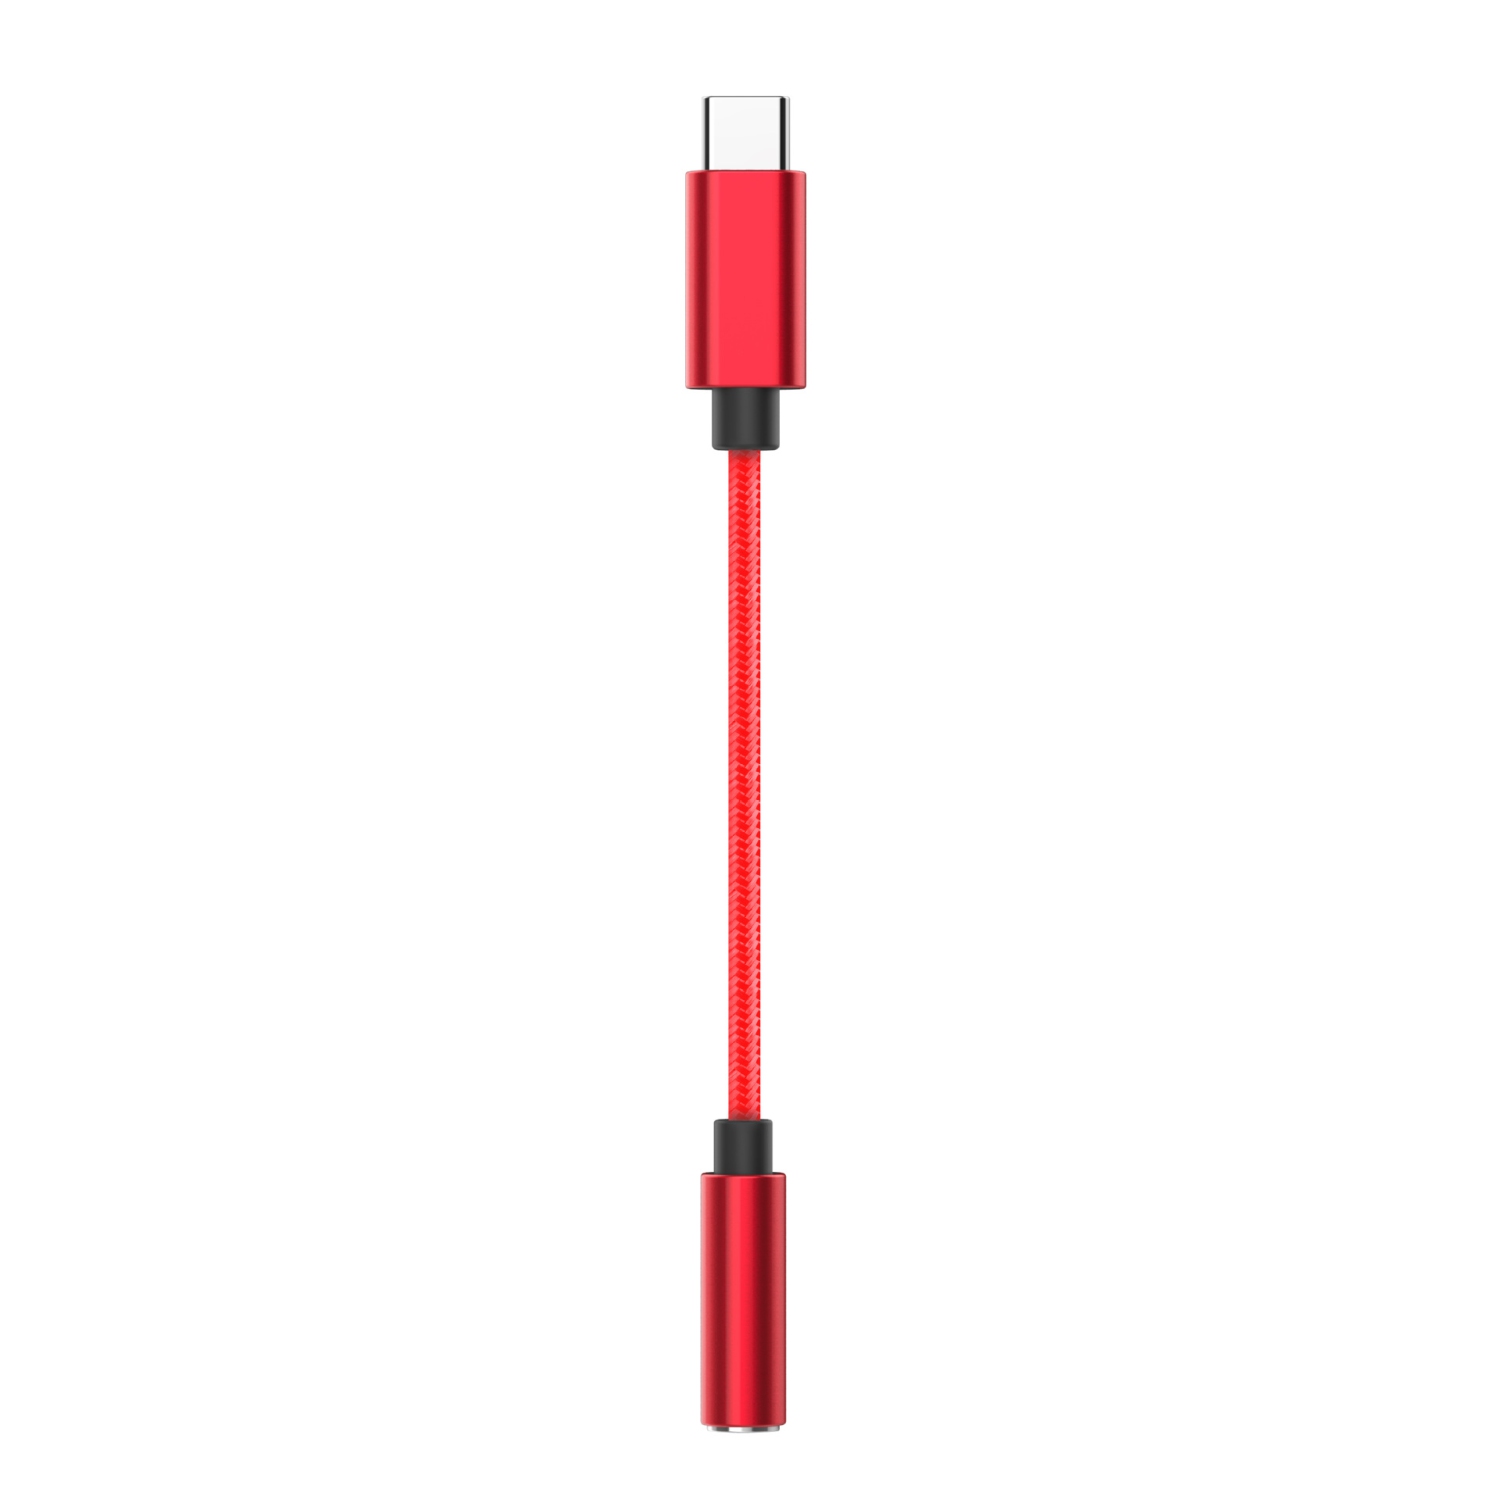 navor USB C to 3.5mm Audio Jack Adapter, Compatible with Samsung Note 20 Note 10 S22 S20 FE S21 Google Pixel 5 OnePlus iPad Mini 2021 Pro and More - Red